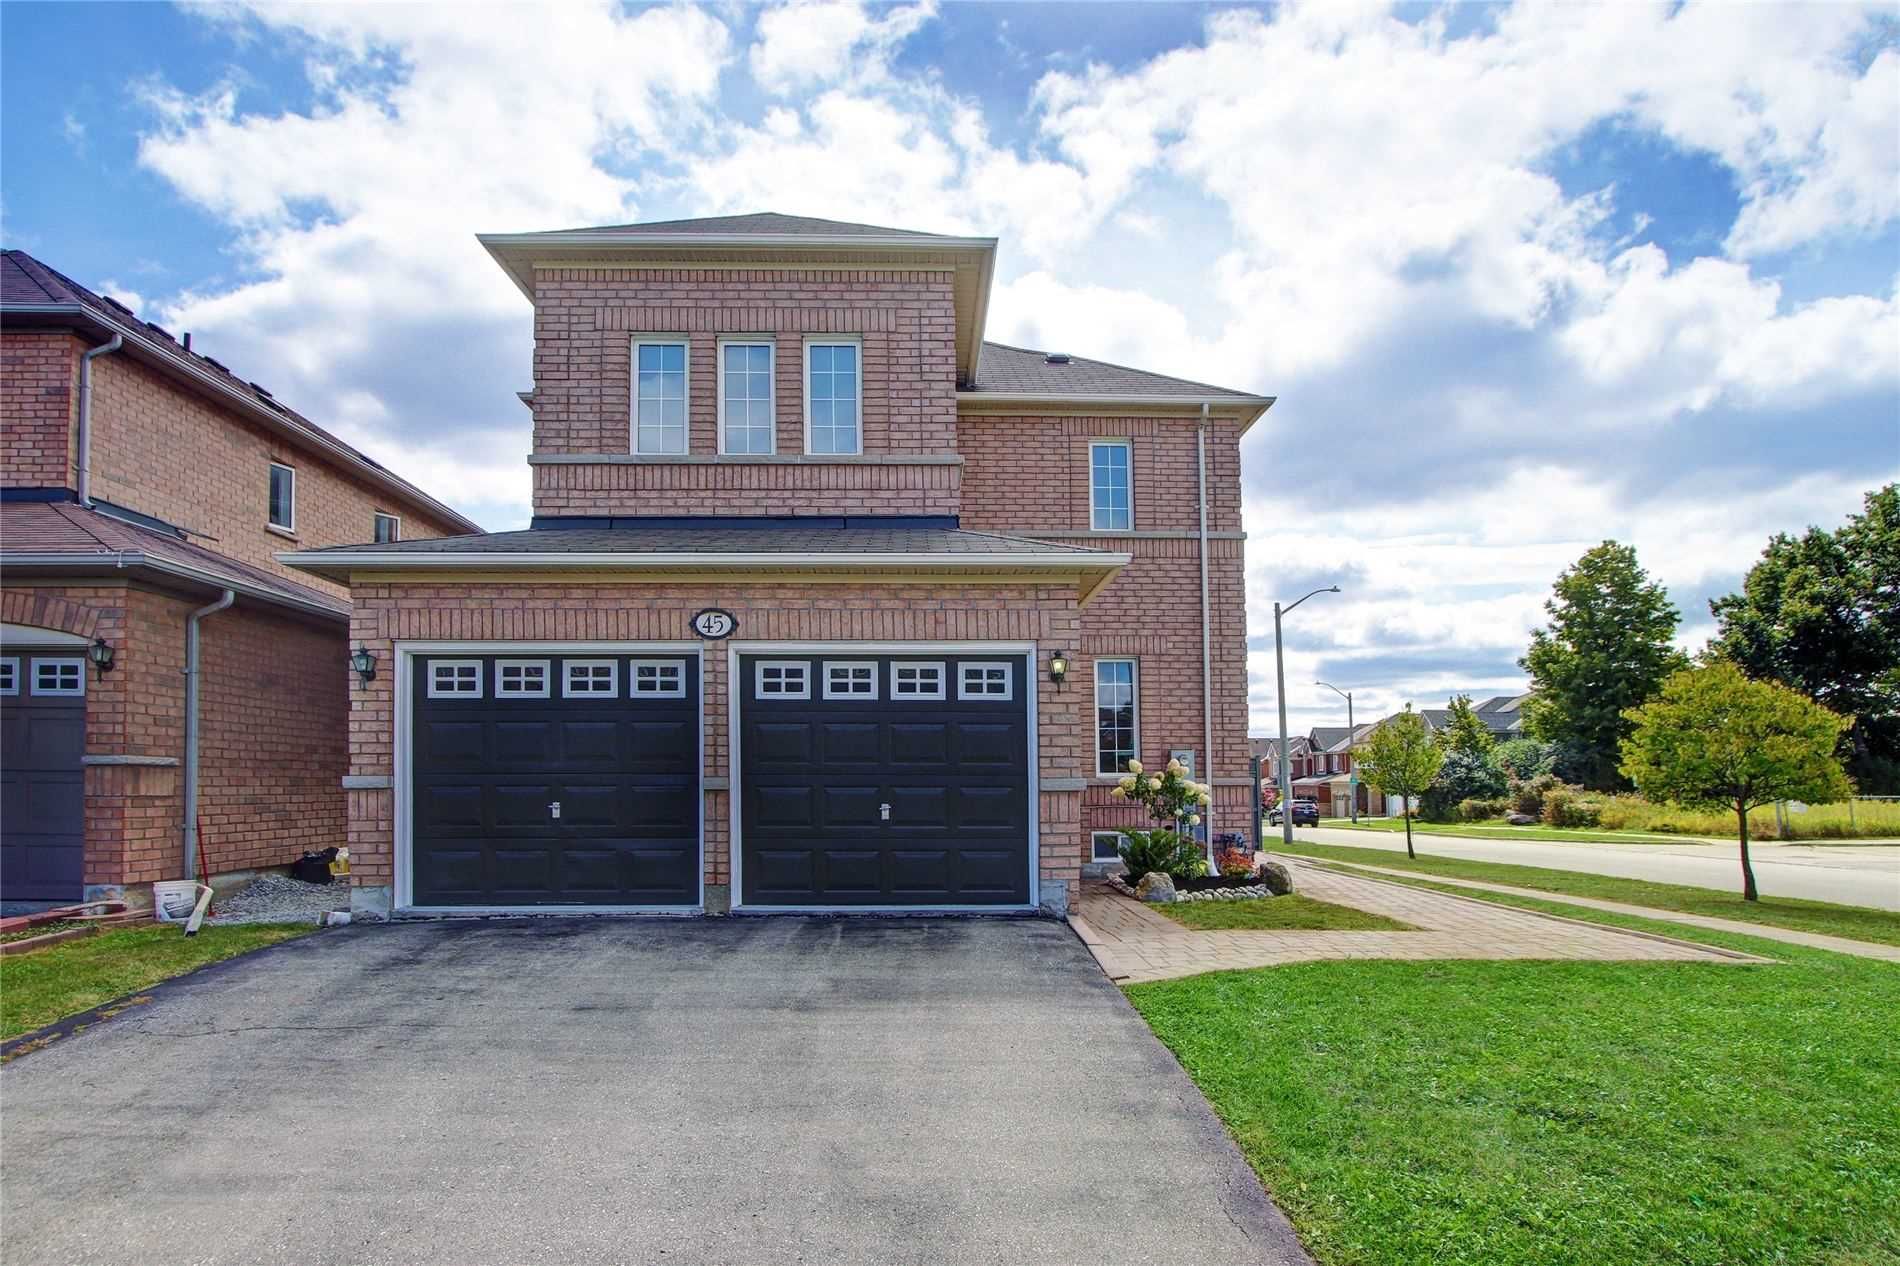 Main Photo: 45 Brackenwood Avenue in Richmond Hill: Freehold for sale : MLS®# N4574998